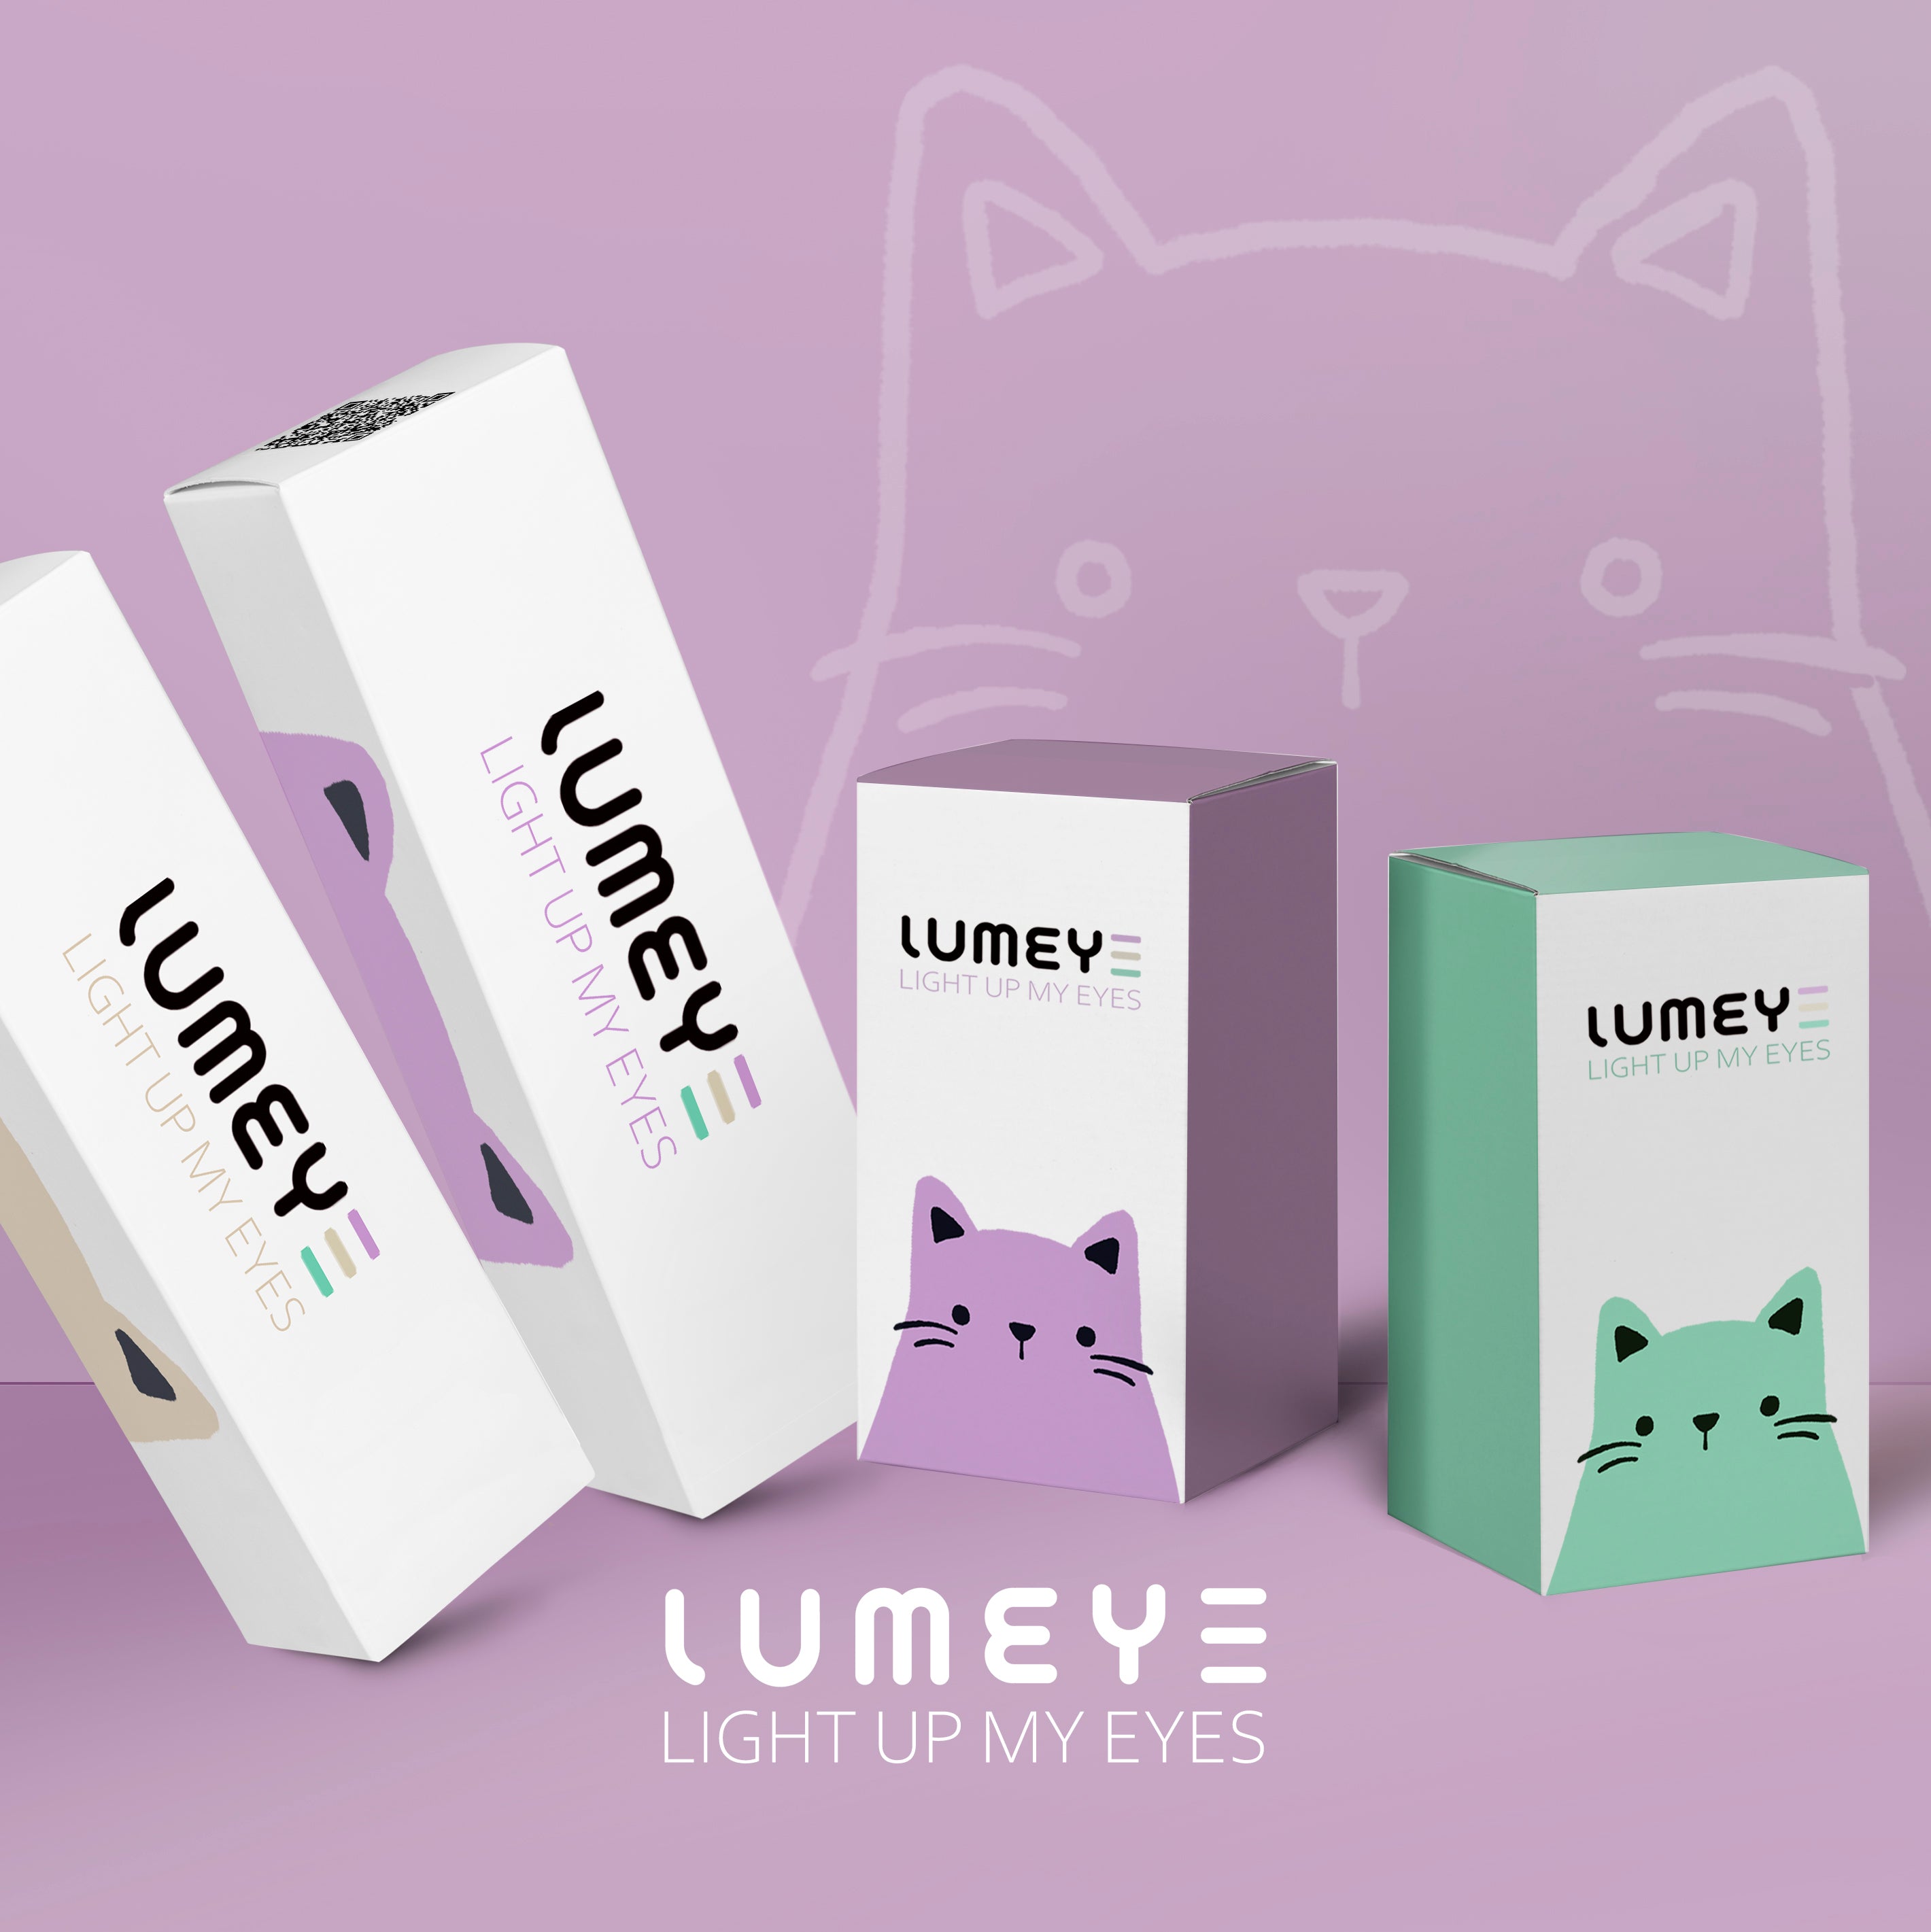 Best COLORED CONTACTS - LUMEYE Lunar Surface Brown Colored Contact Lenses - LUMEYE